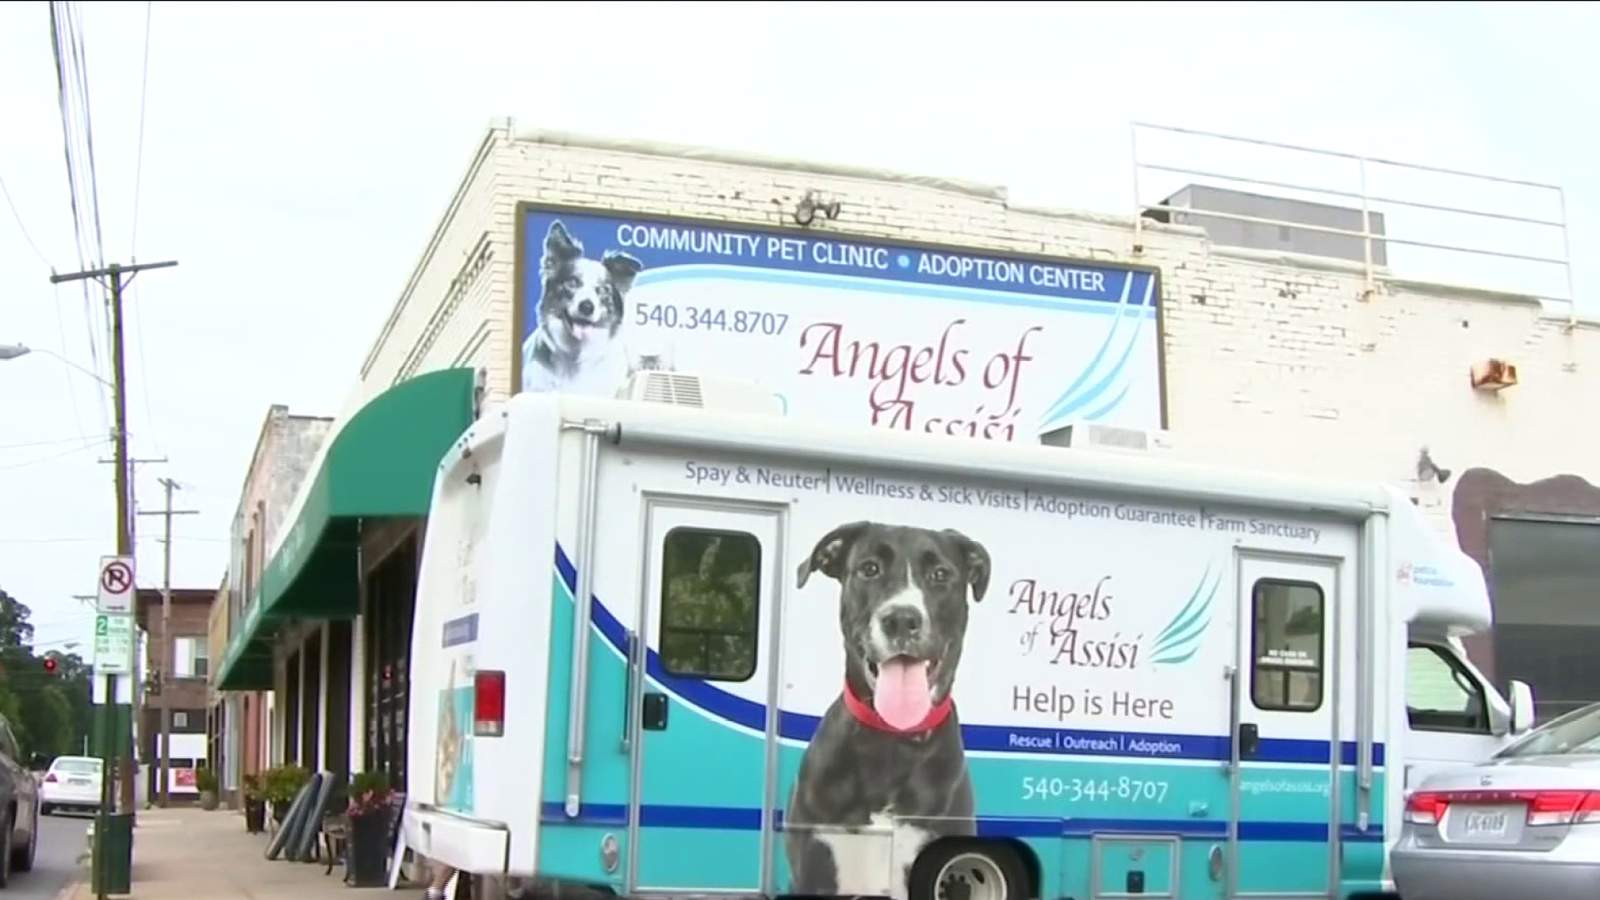 Angels of Assisi helps animals from families who may be facing eviction